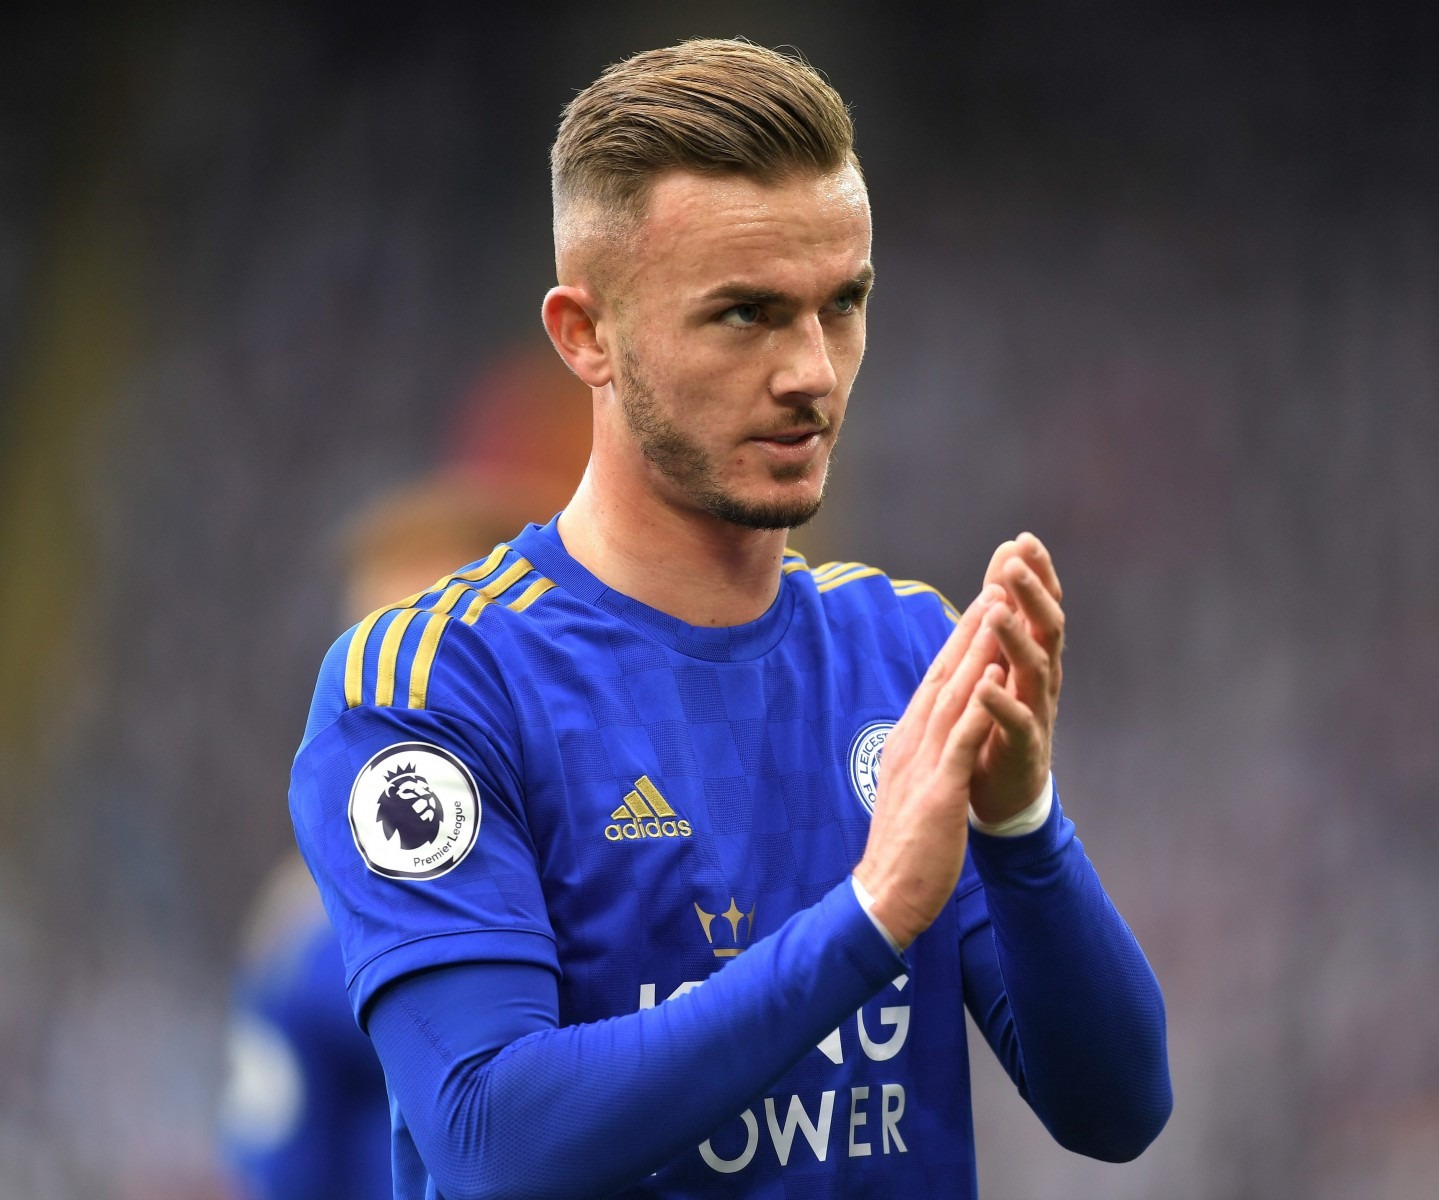 , Man Utd step up transfer hunt for Leicester star James Maddison with Solskjaer eyeing four signings to get out of slump